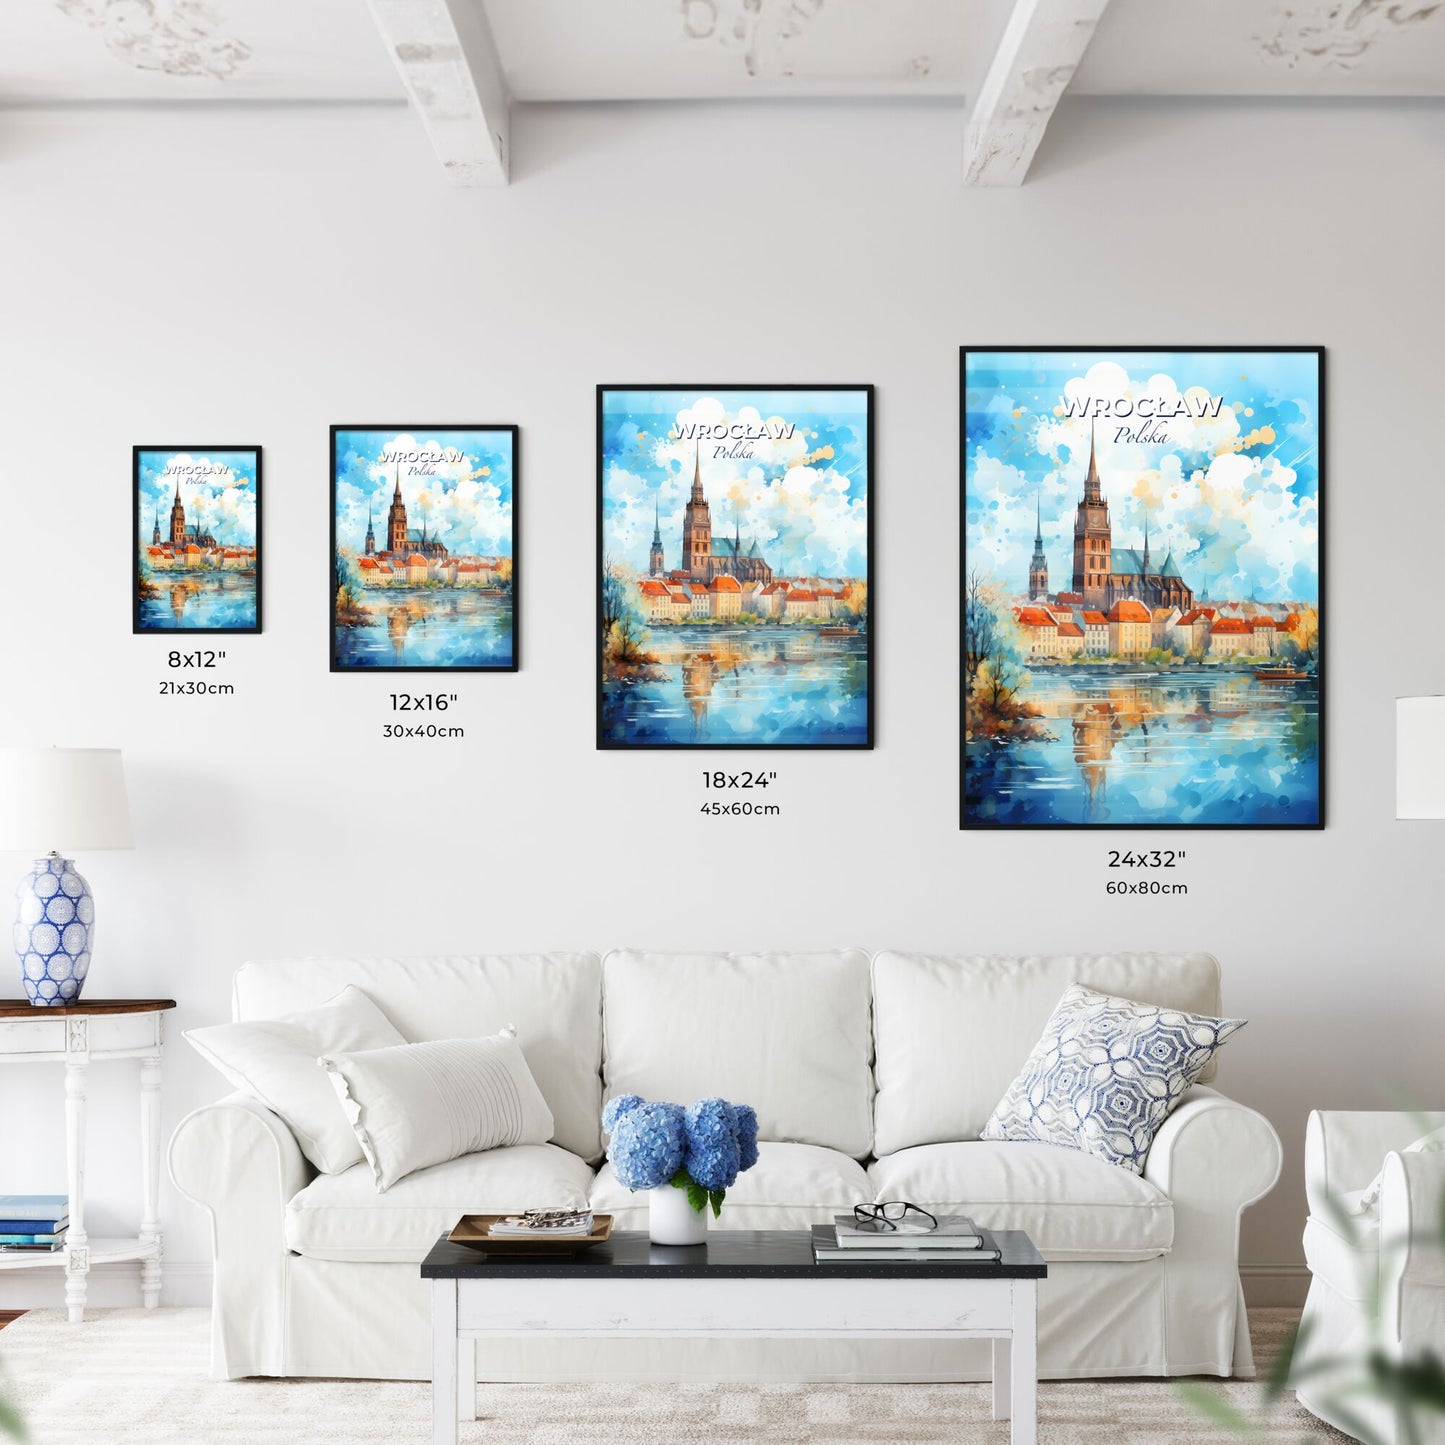 Wrocaw Polska Skyline - A Watercolor Painting Of A City With A Tower And A Lake - Customizable Travel Gift Default Title